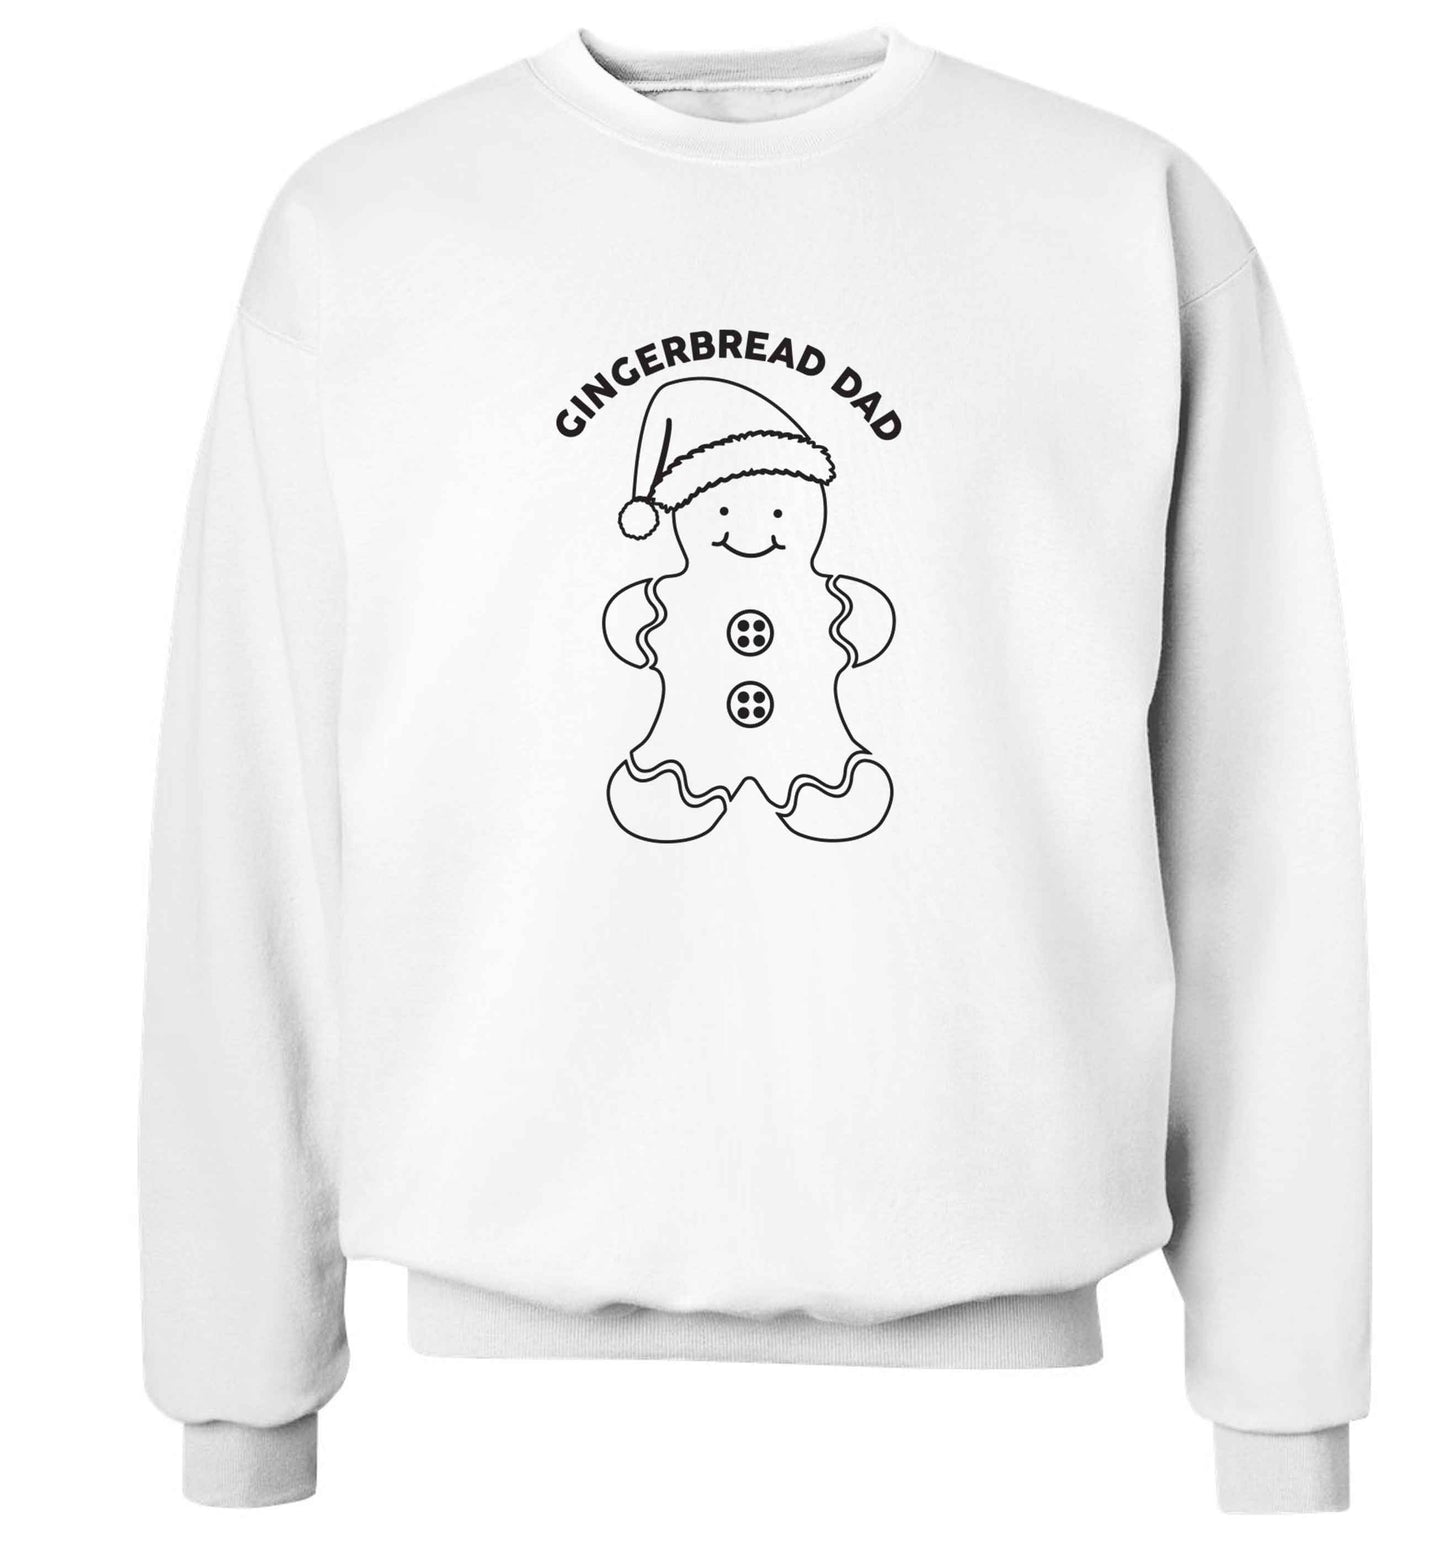 Merry Christmas adult's unisex white sweater 2XL